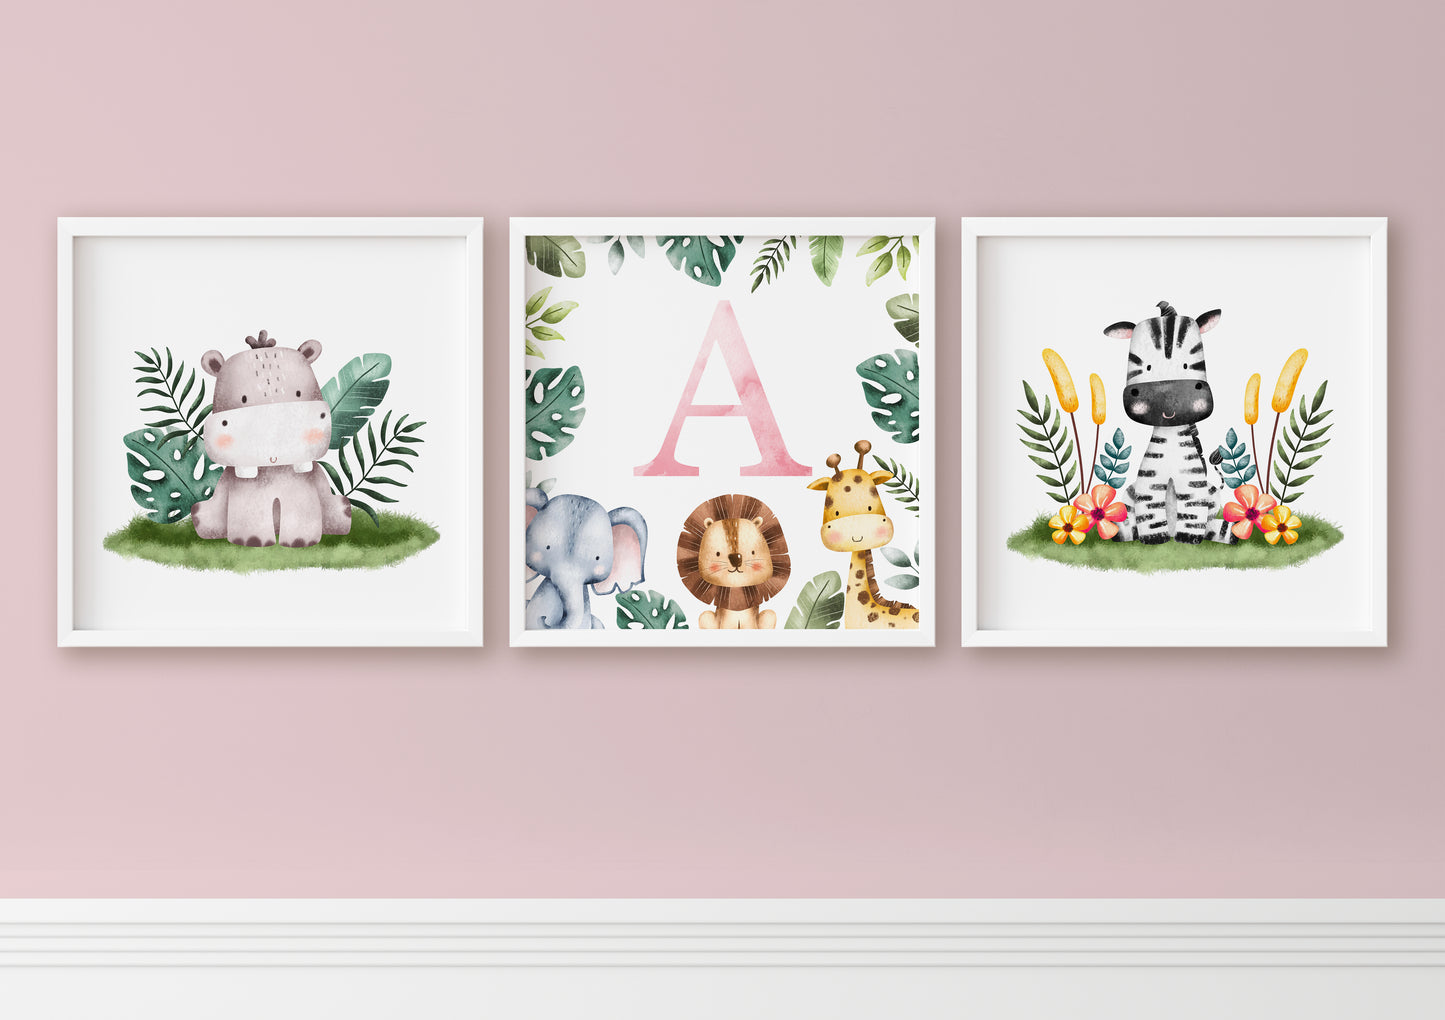 Set of 3 Safari animal prints download perfect for a childrens bedroom or nursery.